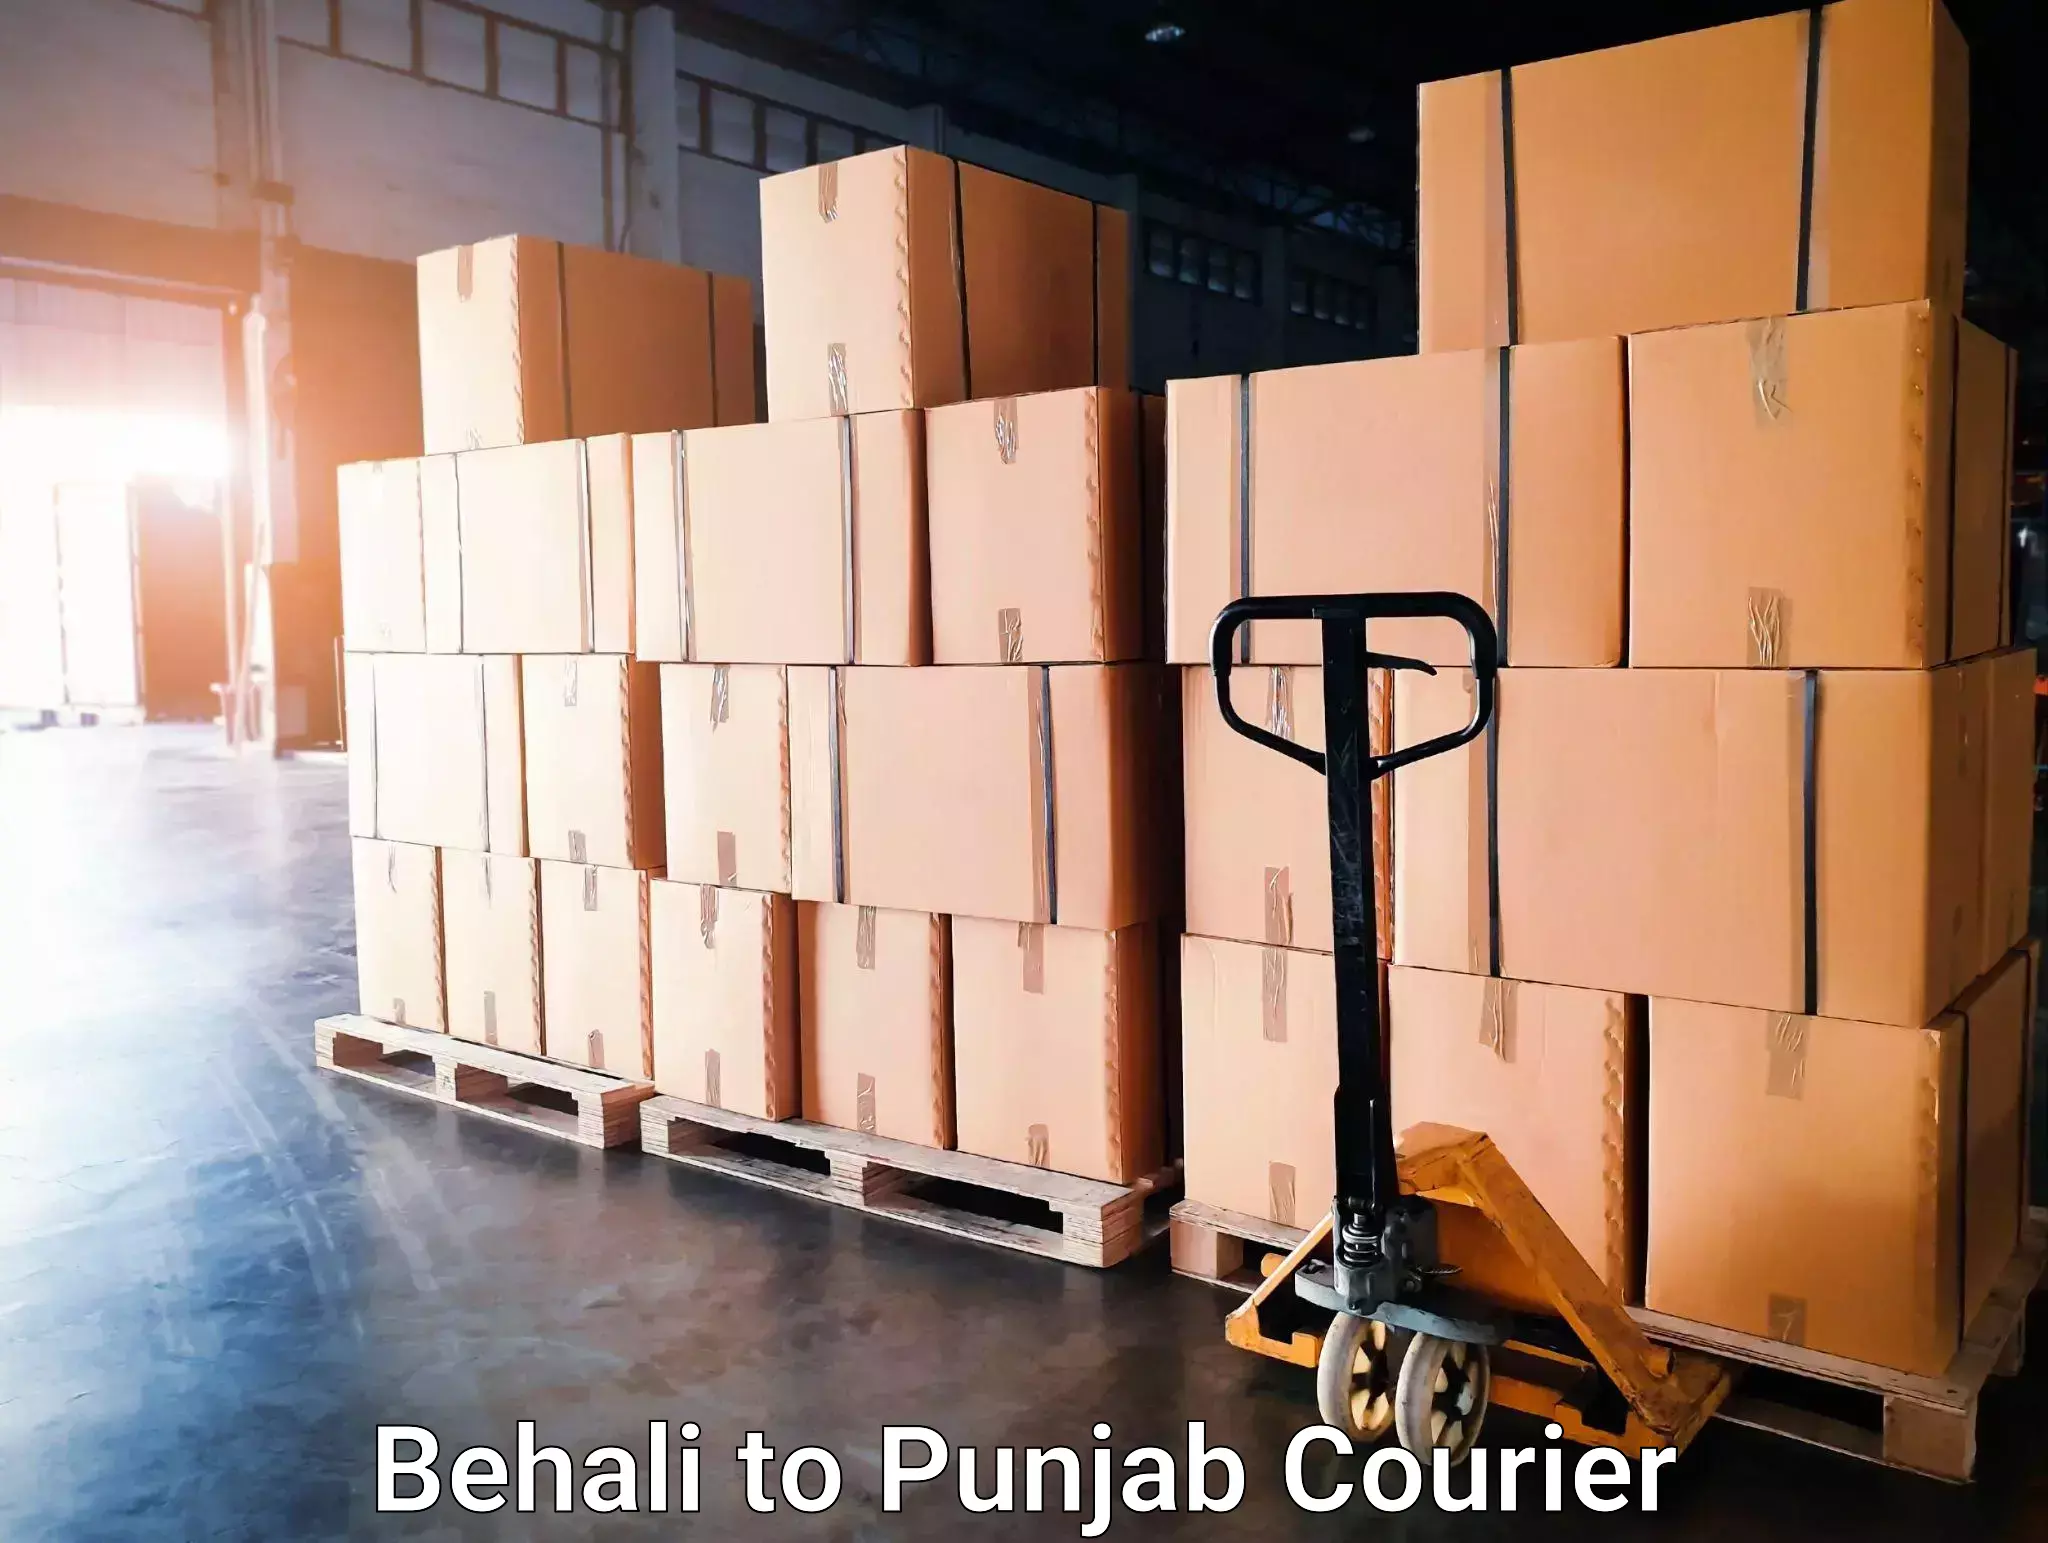 24-hour courier services in Behali to Fatehgarh Sahib